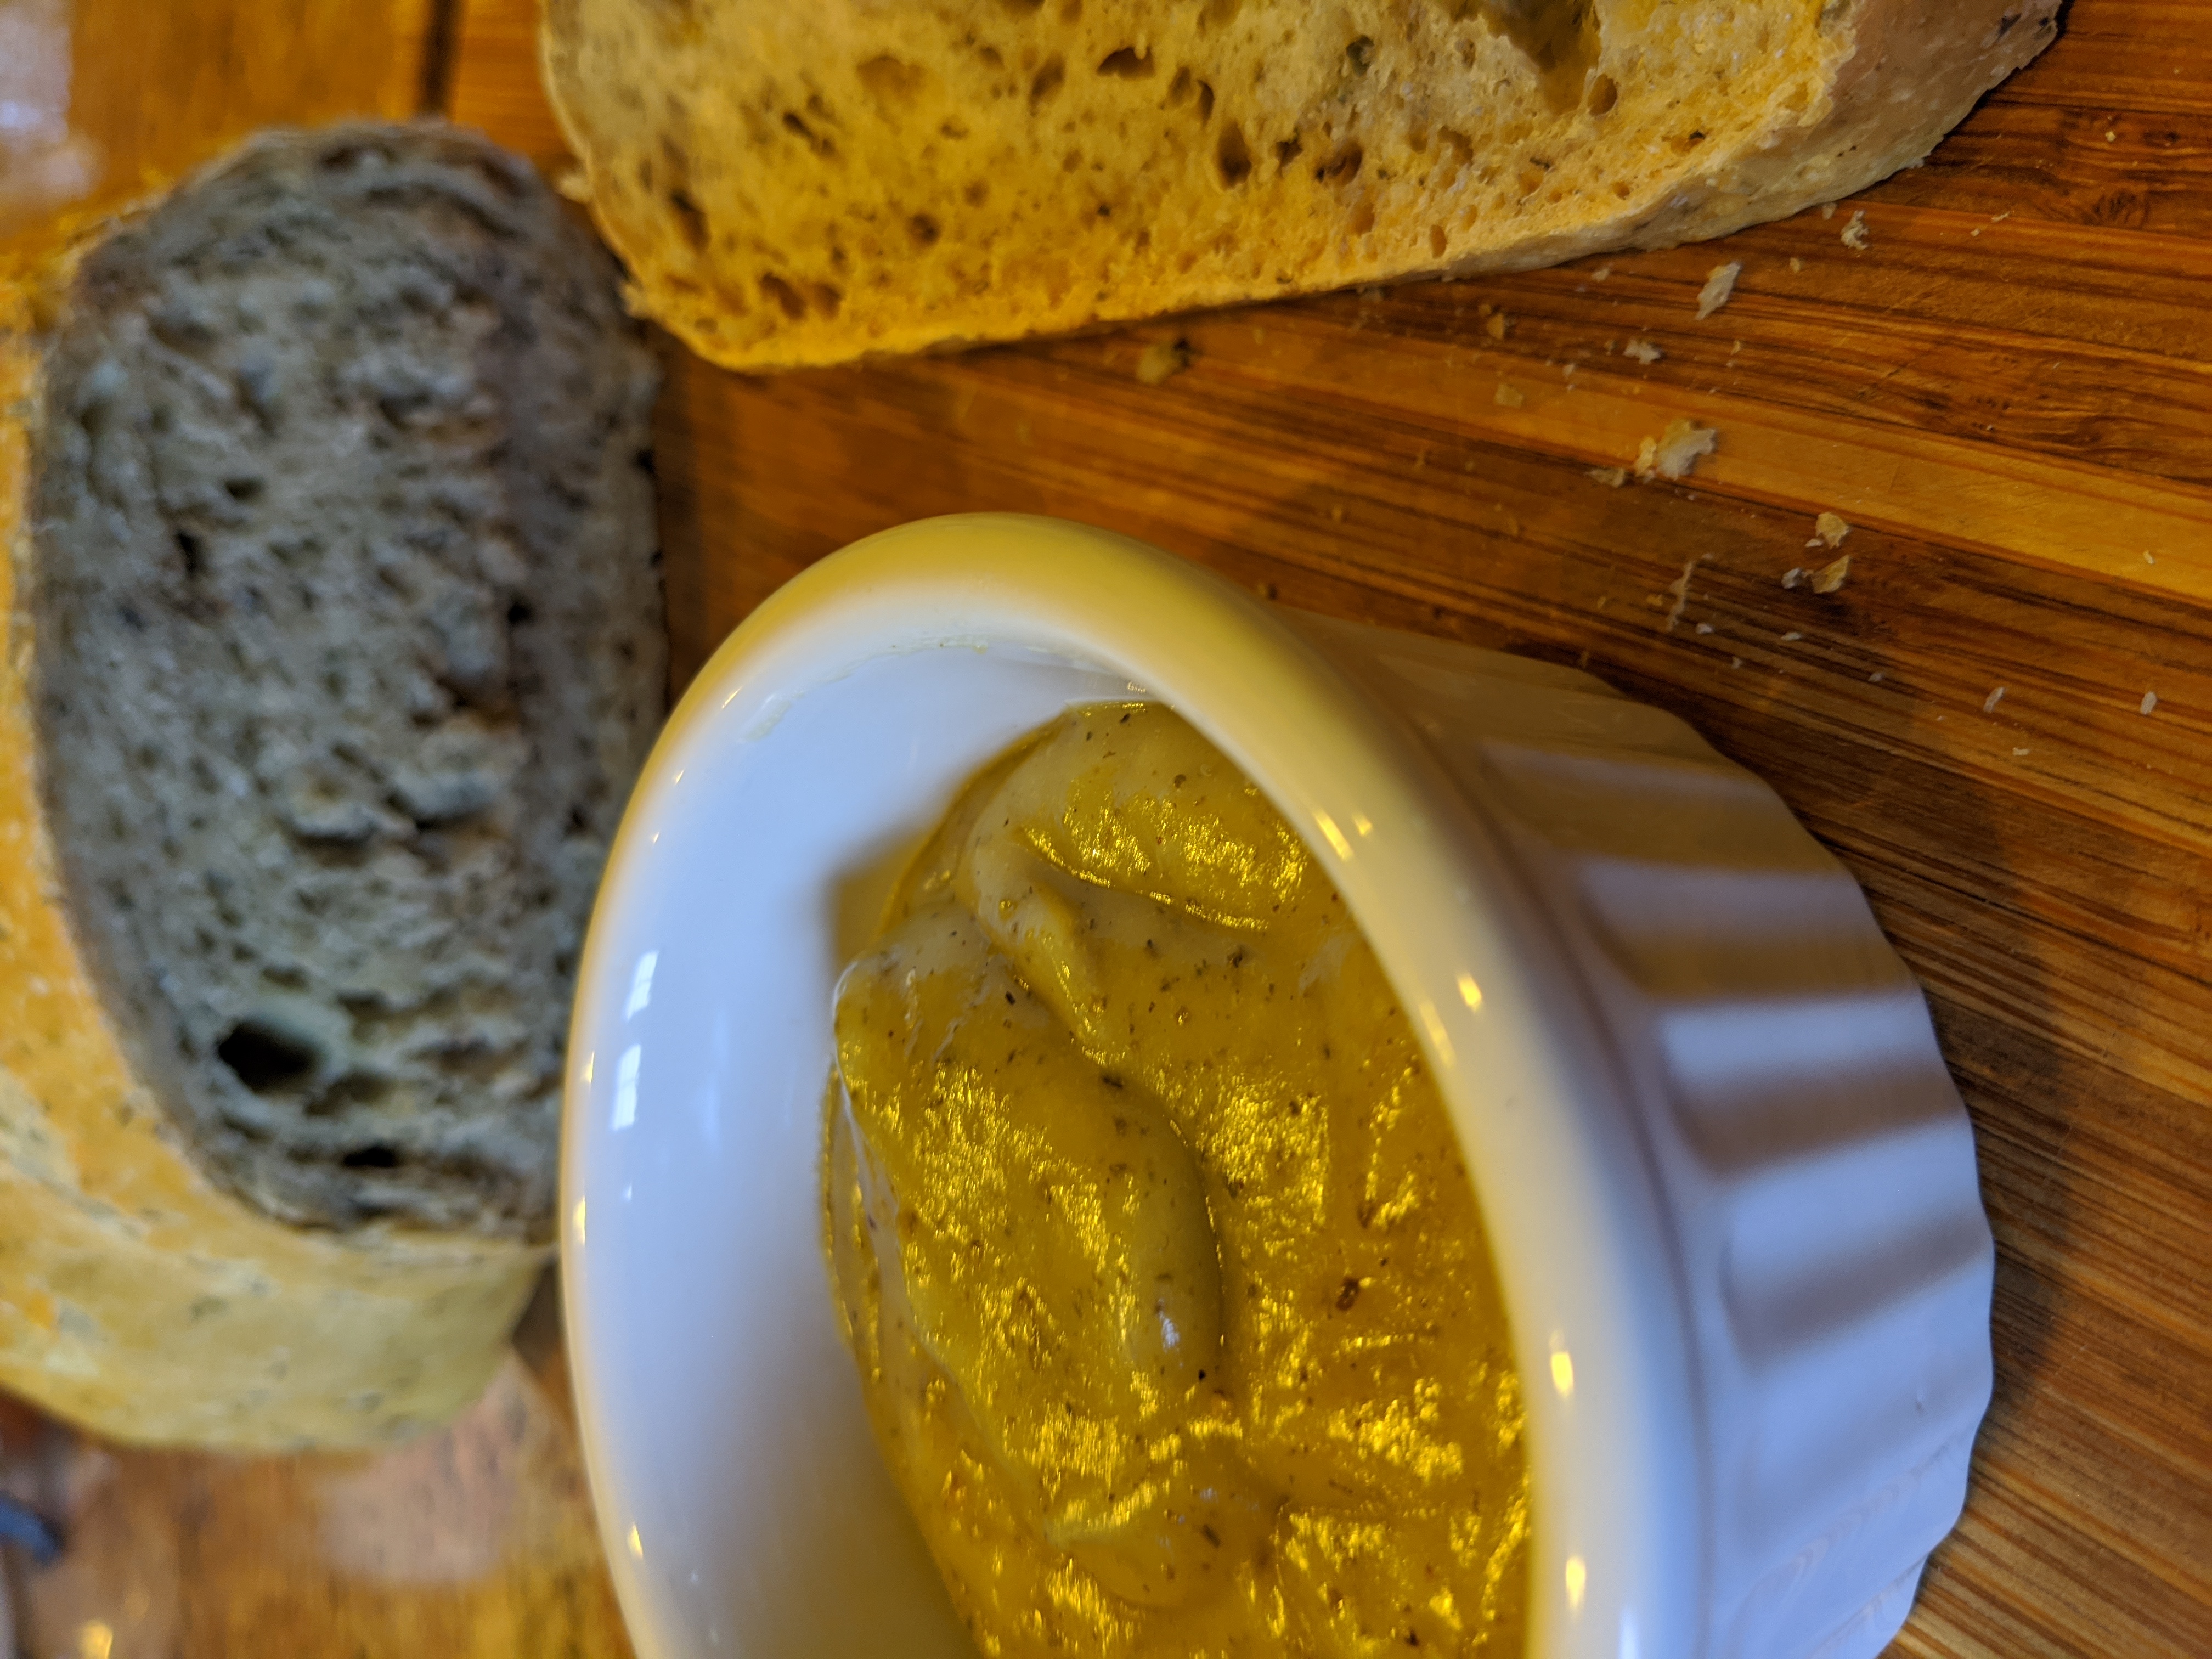 Roasted Elephant Garlic Spread, with Olive Oil and Herbs recipe image